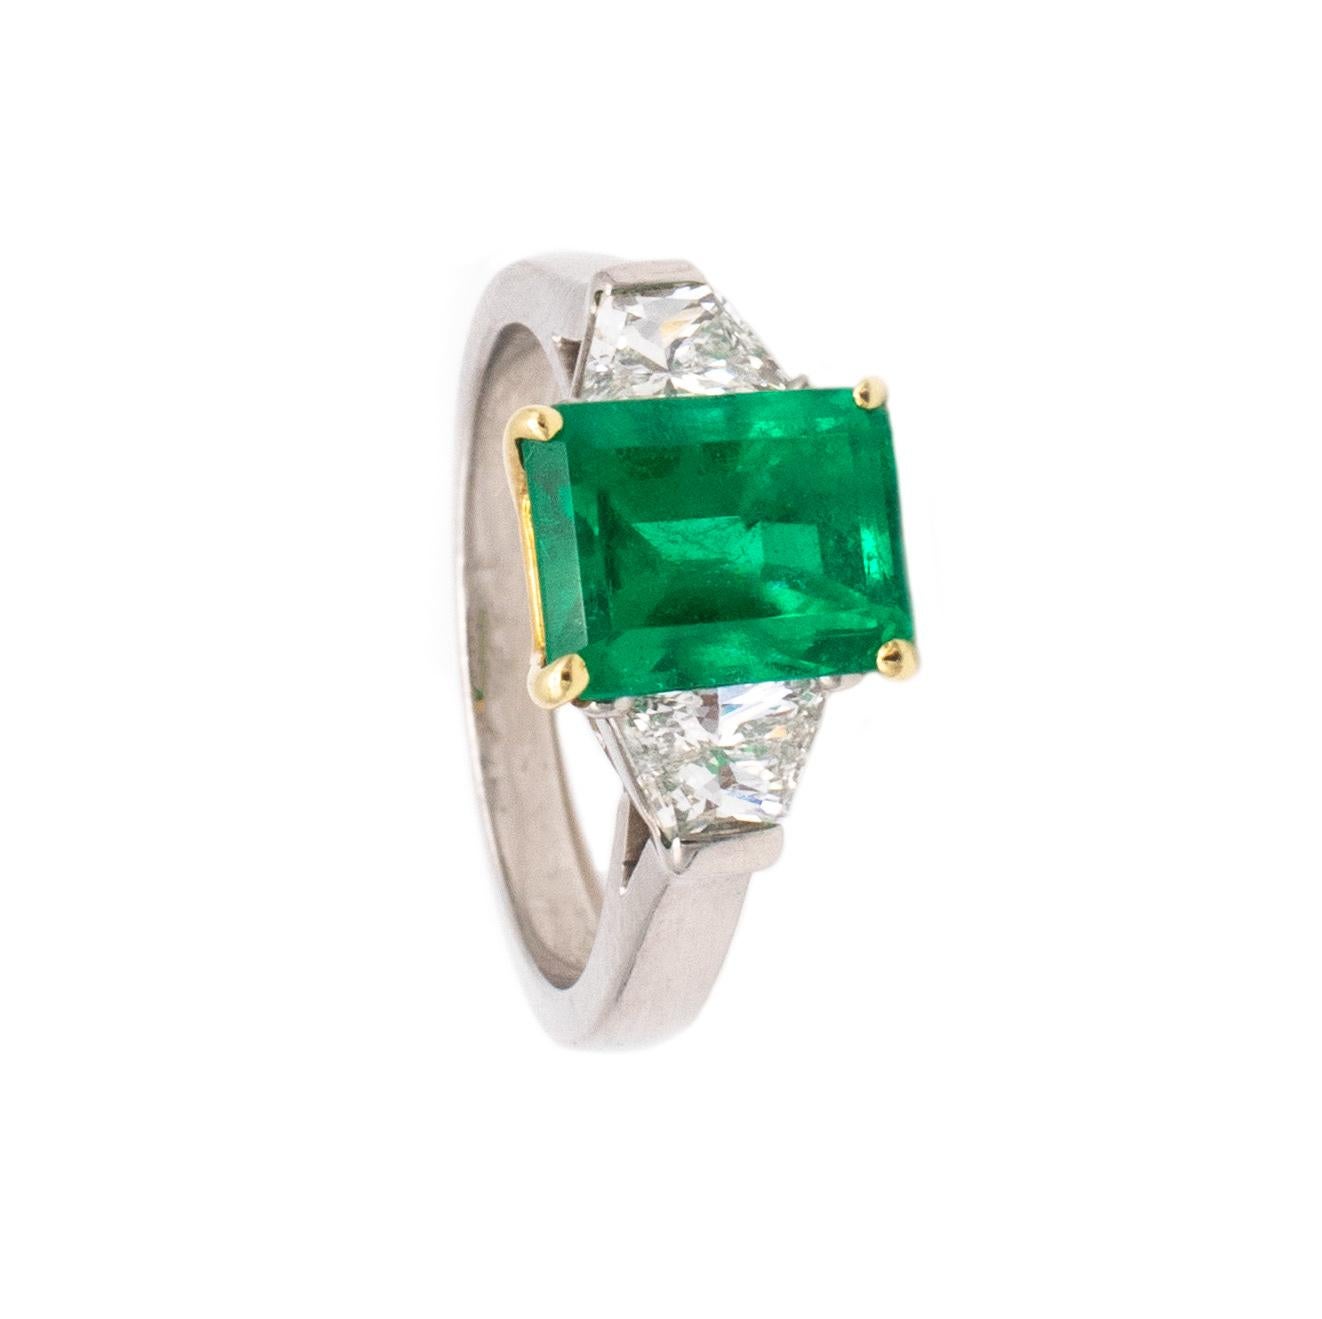 Exceptional ring with certified Colombian emerald designed by Oscar Heyman.

An elegant classic three stones setting ring, created in New York city by the Oscar Heyman Brothers. This gorgeous piece was crafted in solid .900/1000 platinum, with 18